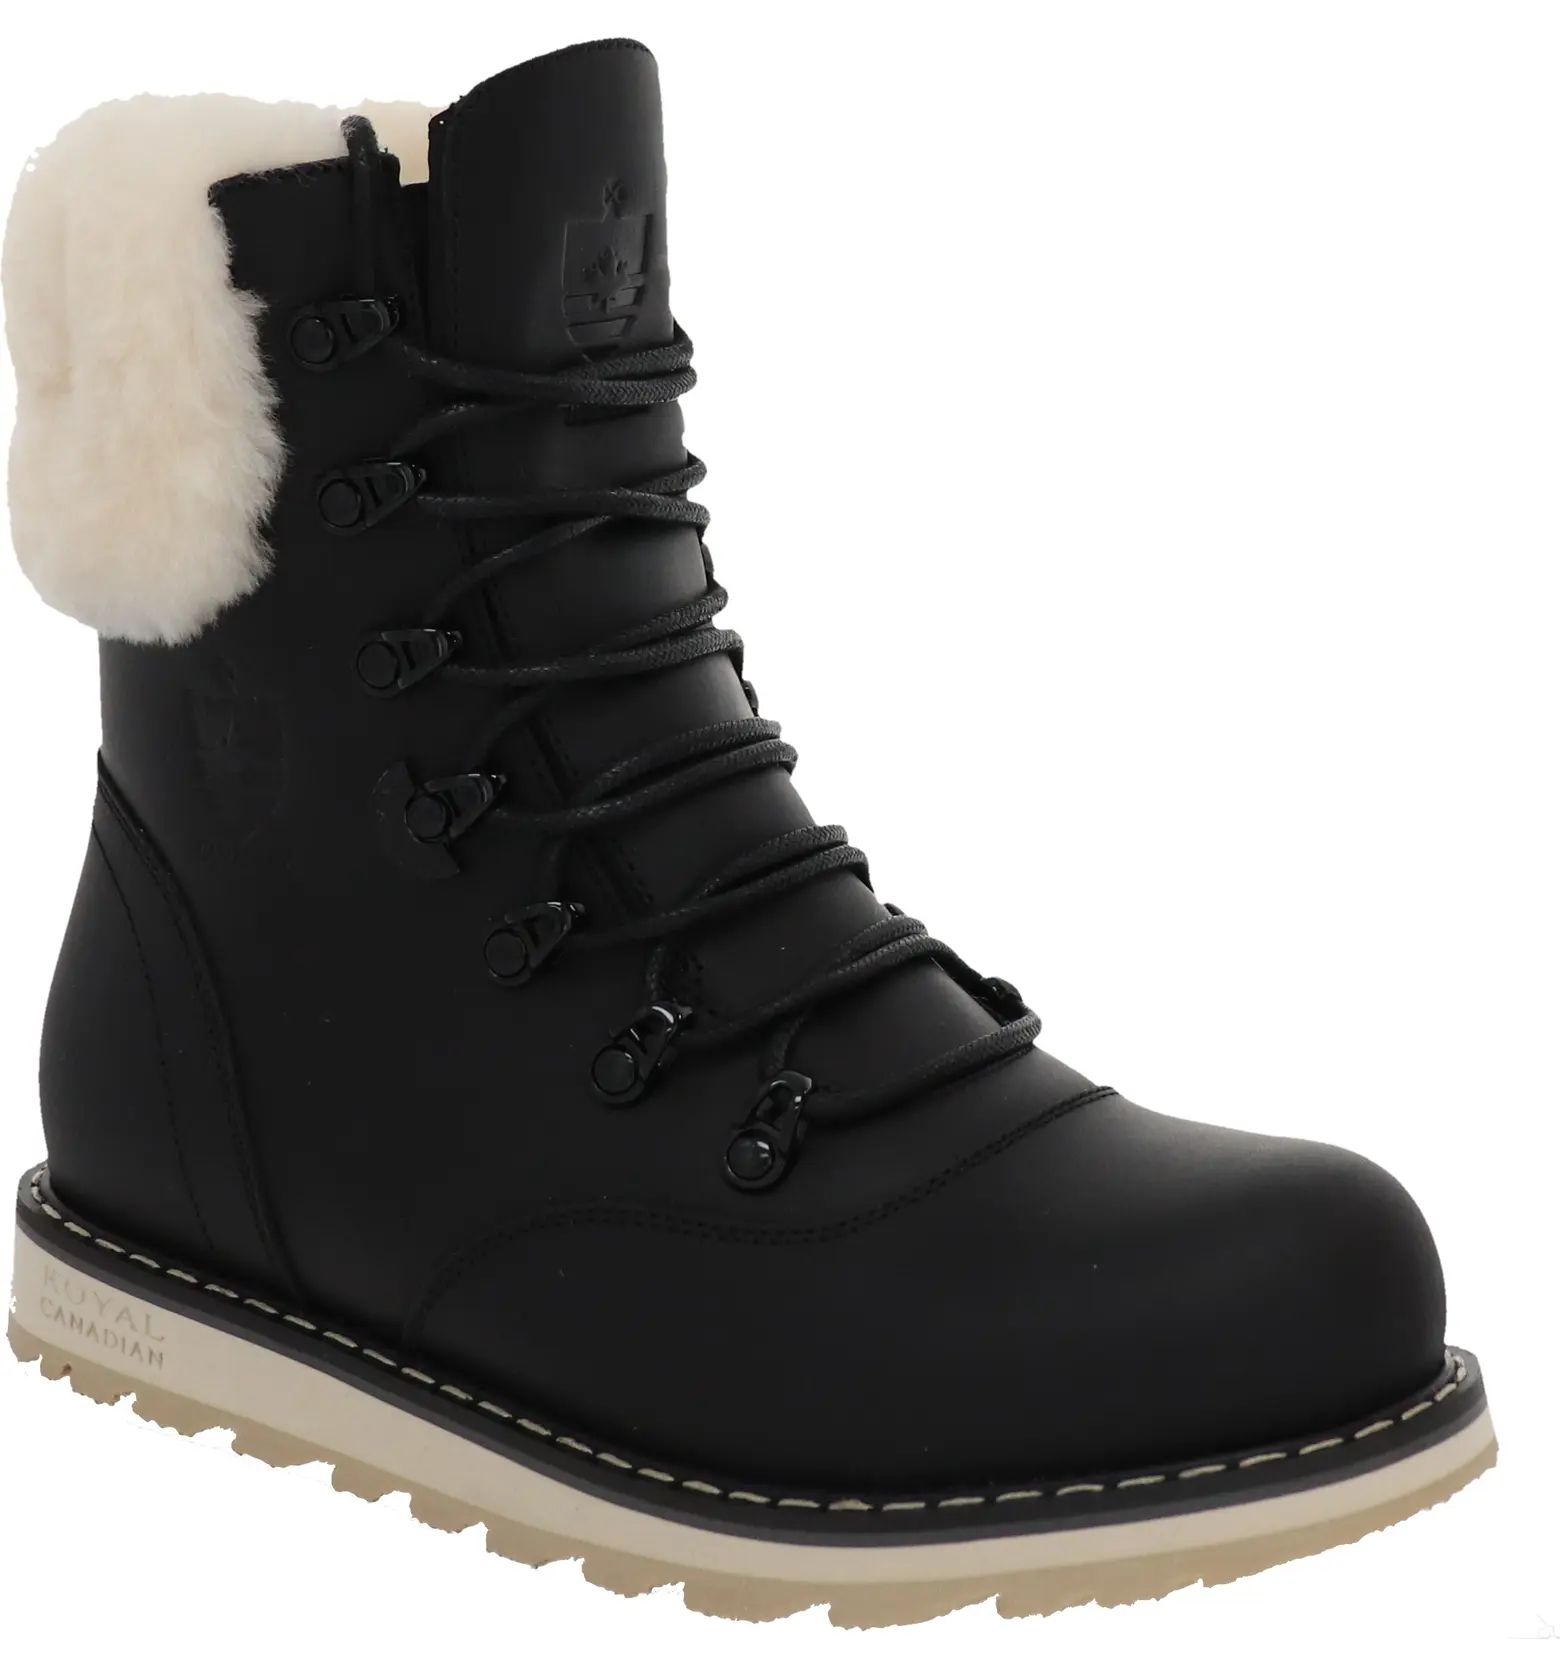 Royal Canadian Cambridge Waterproof Boot with Genuine Shearling Trim | Nordstrom | Nordstrom